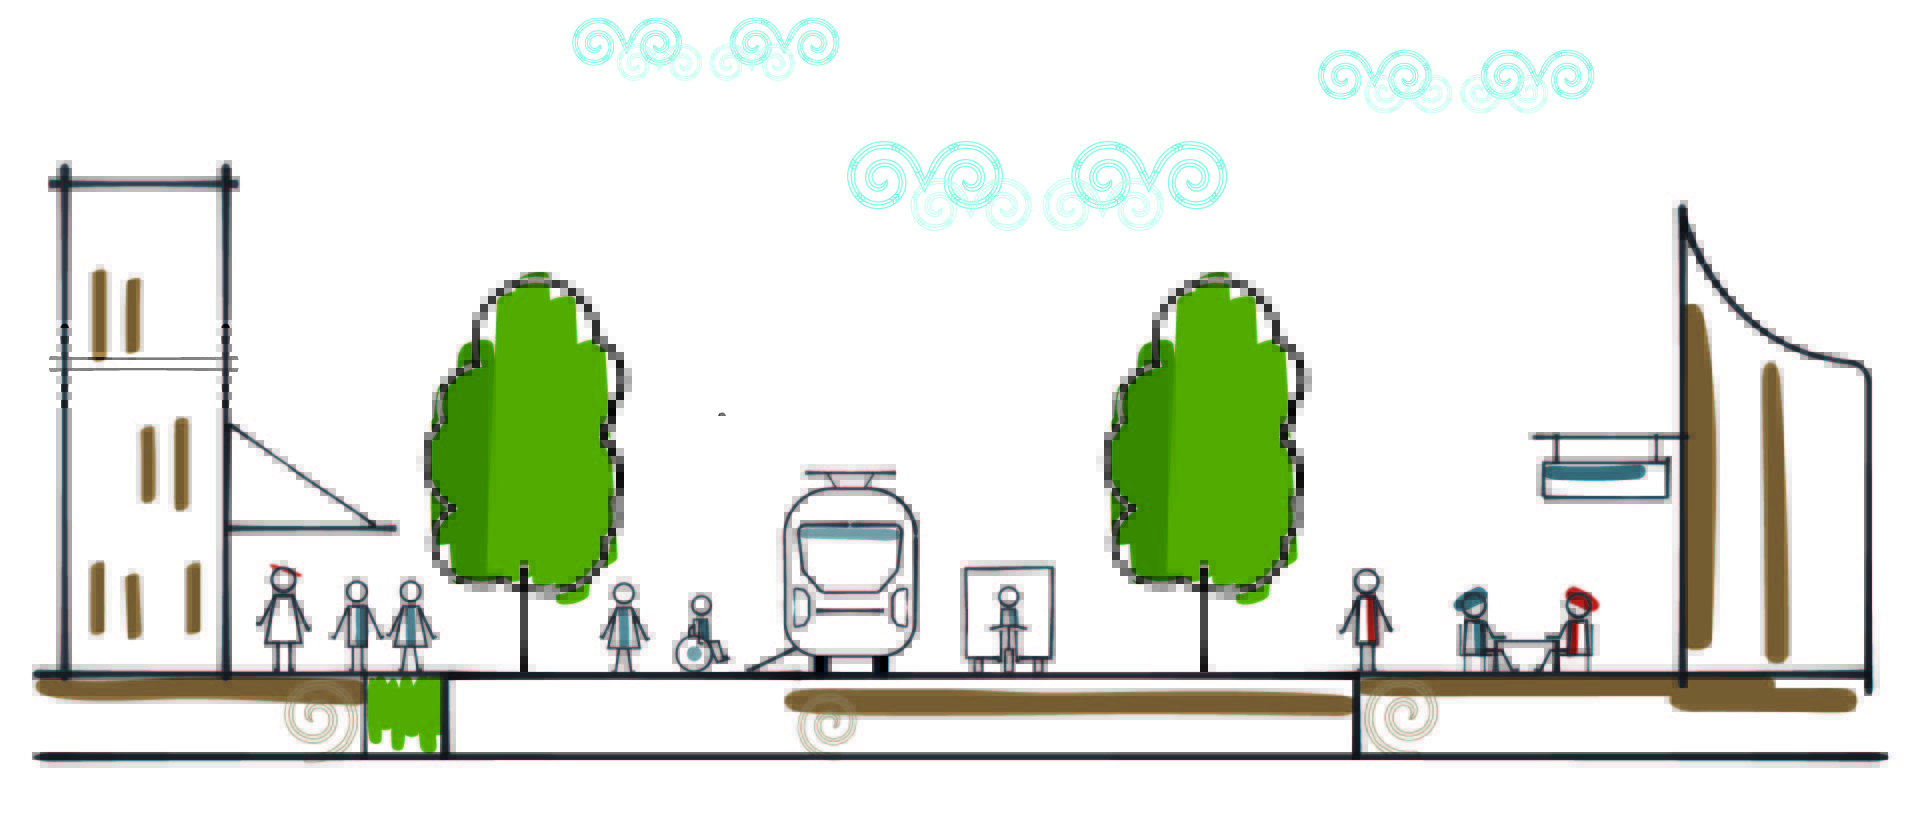 Drawing of people in urban area, walking, boarding a tram, riding an electric freight vehicle, and sitting on street furniture.